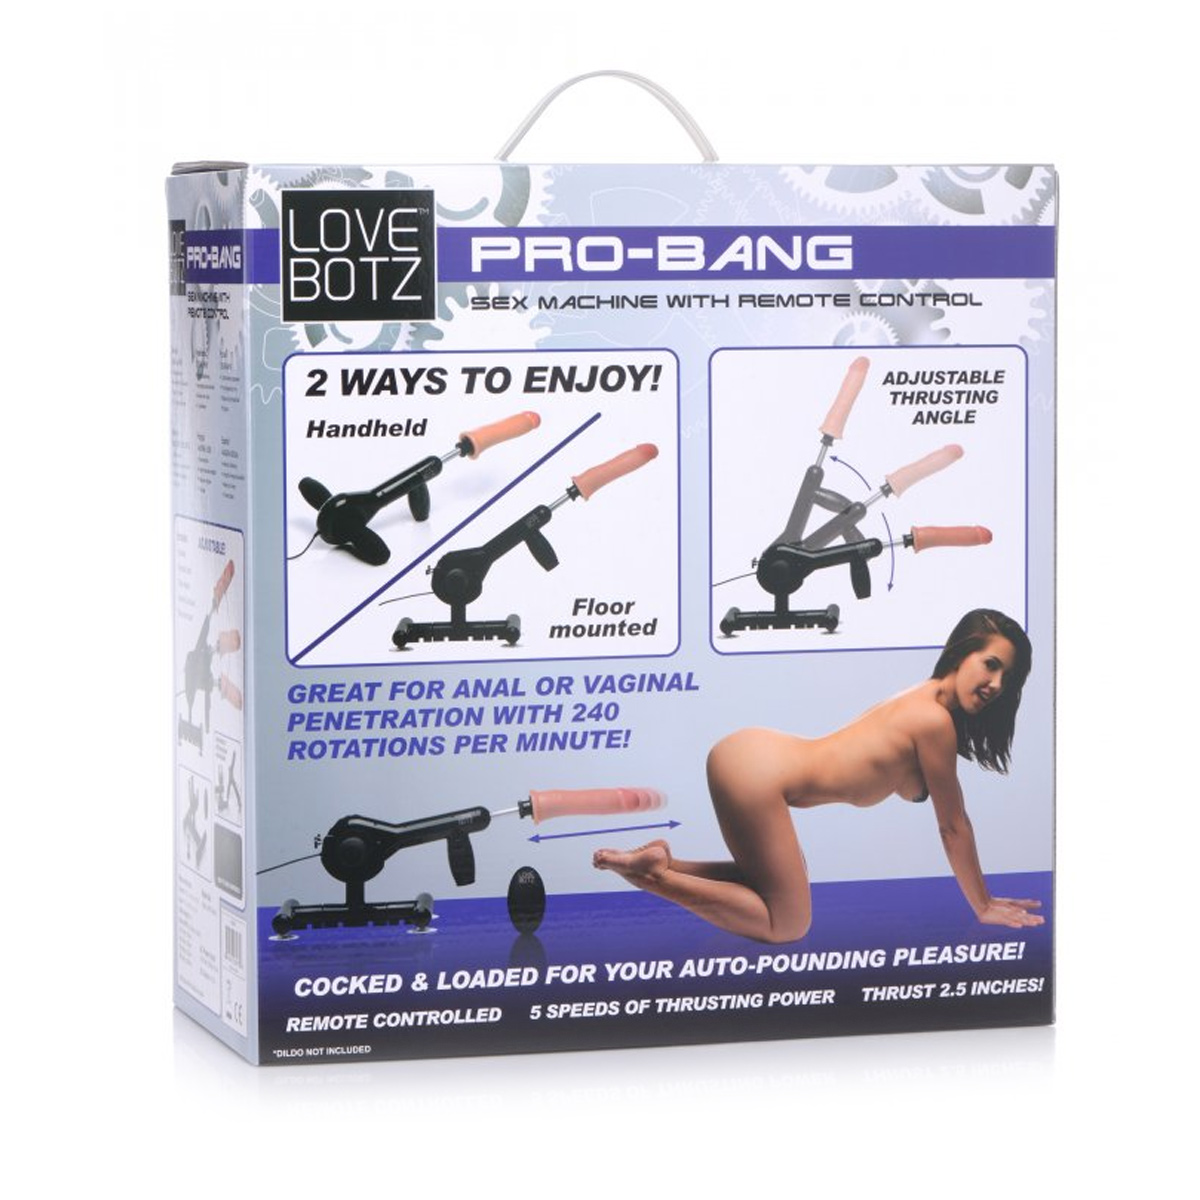 Pro-Bang-Sex-Machine-with-Remote-Control-118-XR-AG568-8